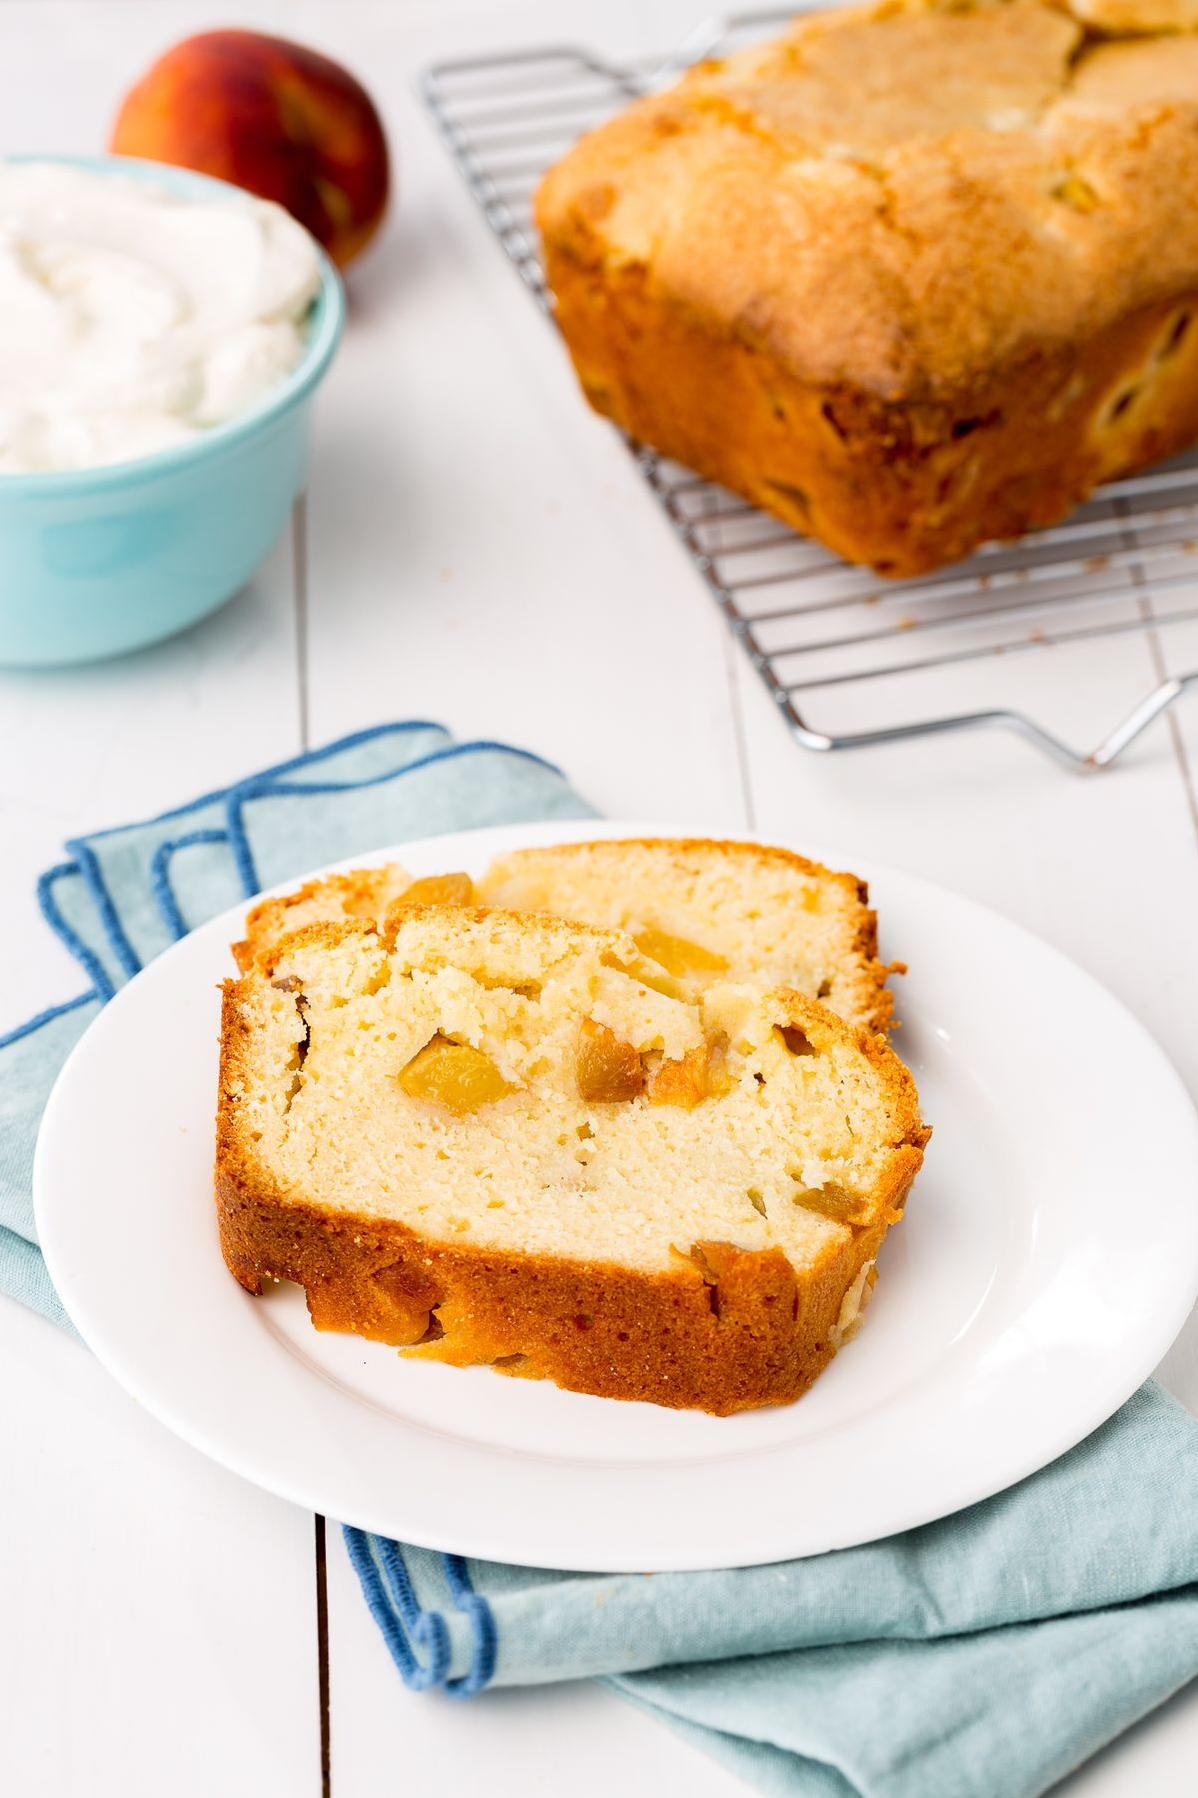  A pound cake worth its weight in gold